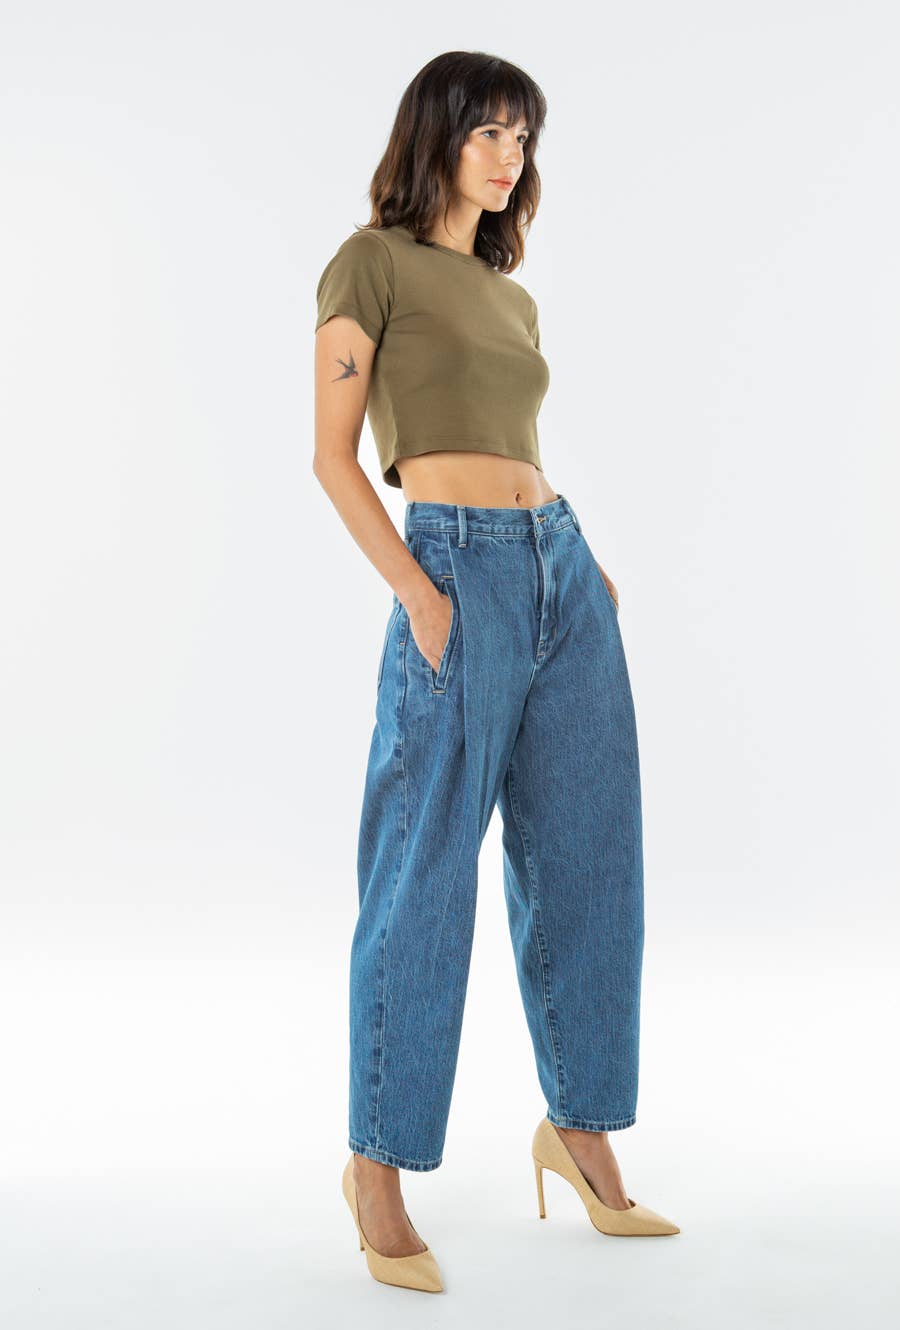 Rose Relaxed Pleat Pant - Salina